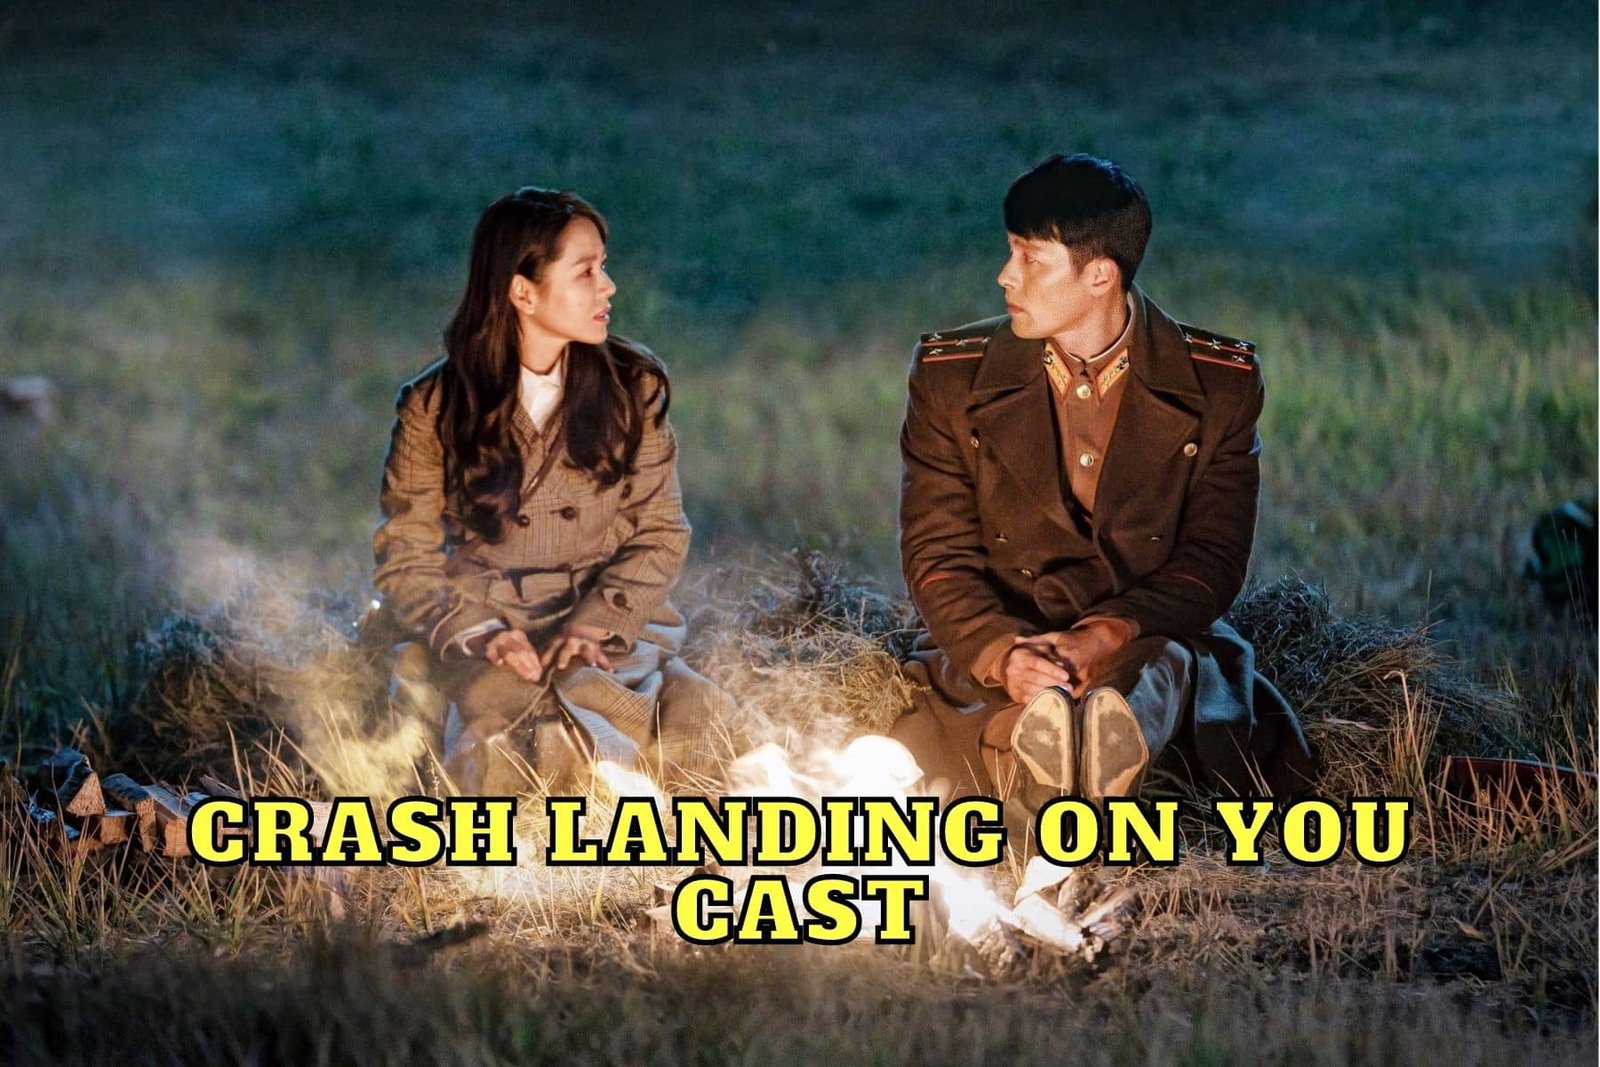 Crash Landing on You Cast - Ages, Partners, Characters